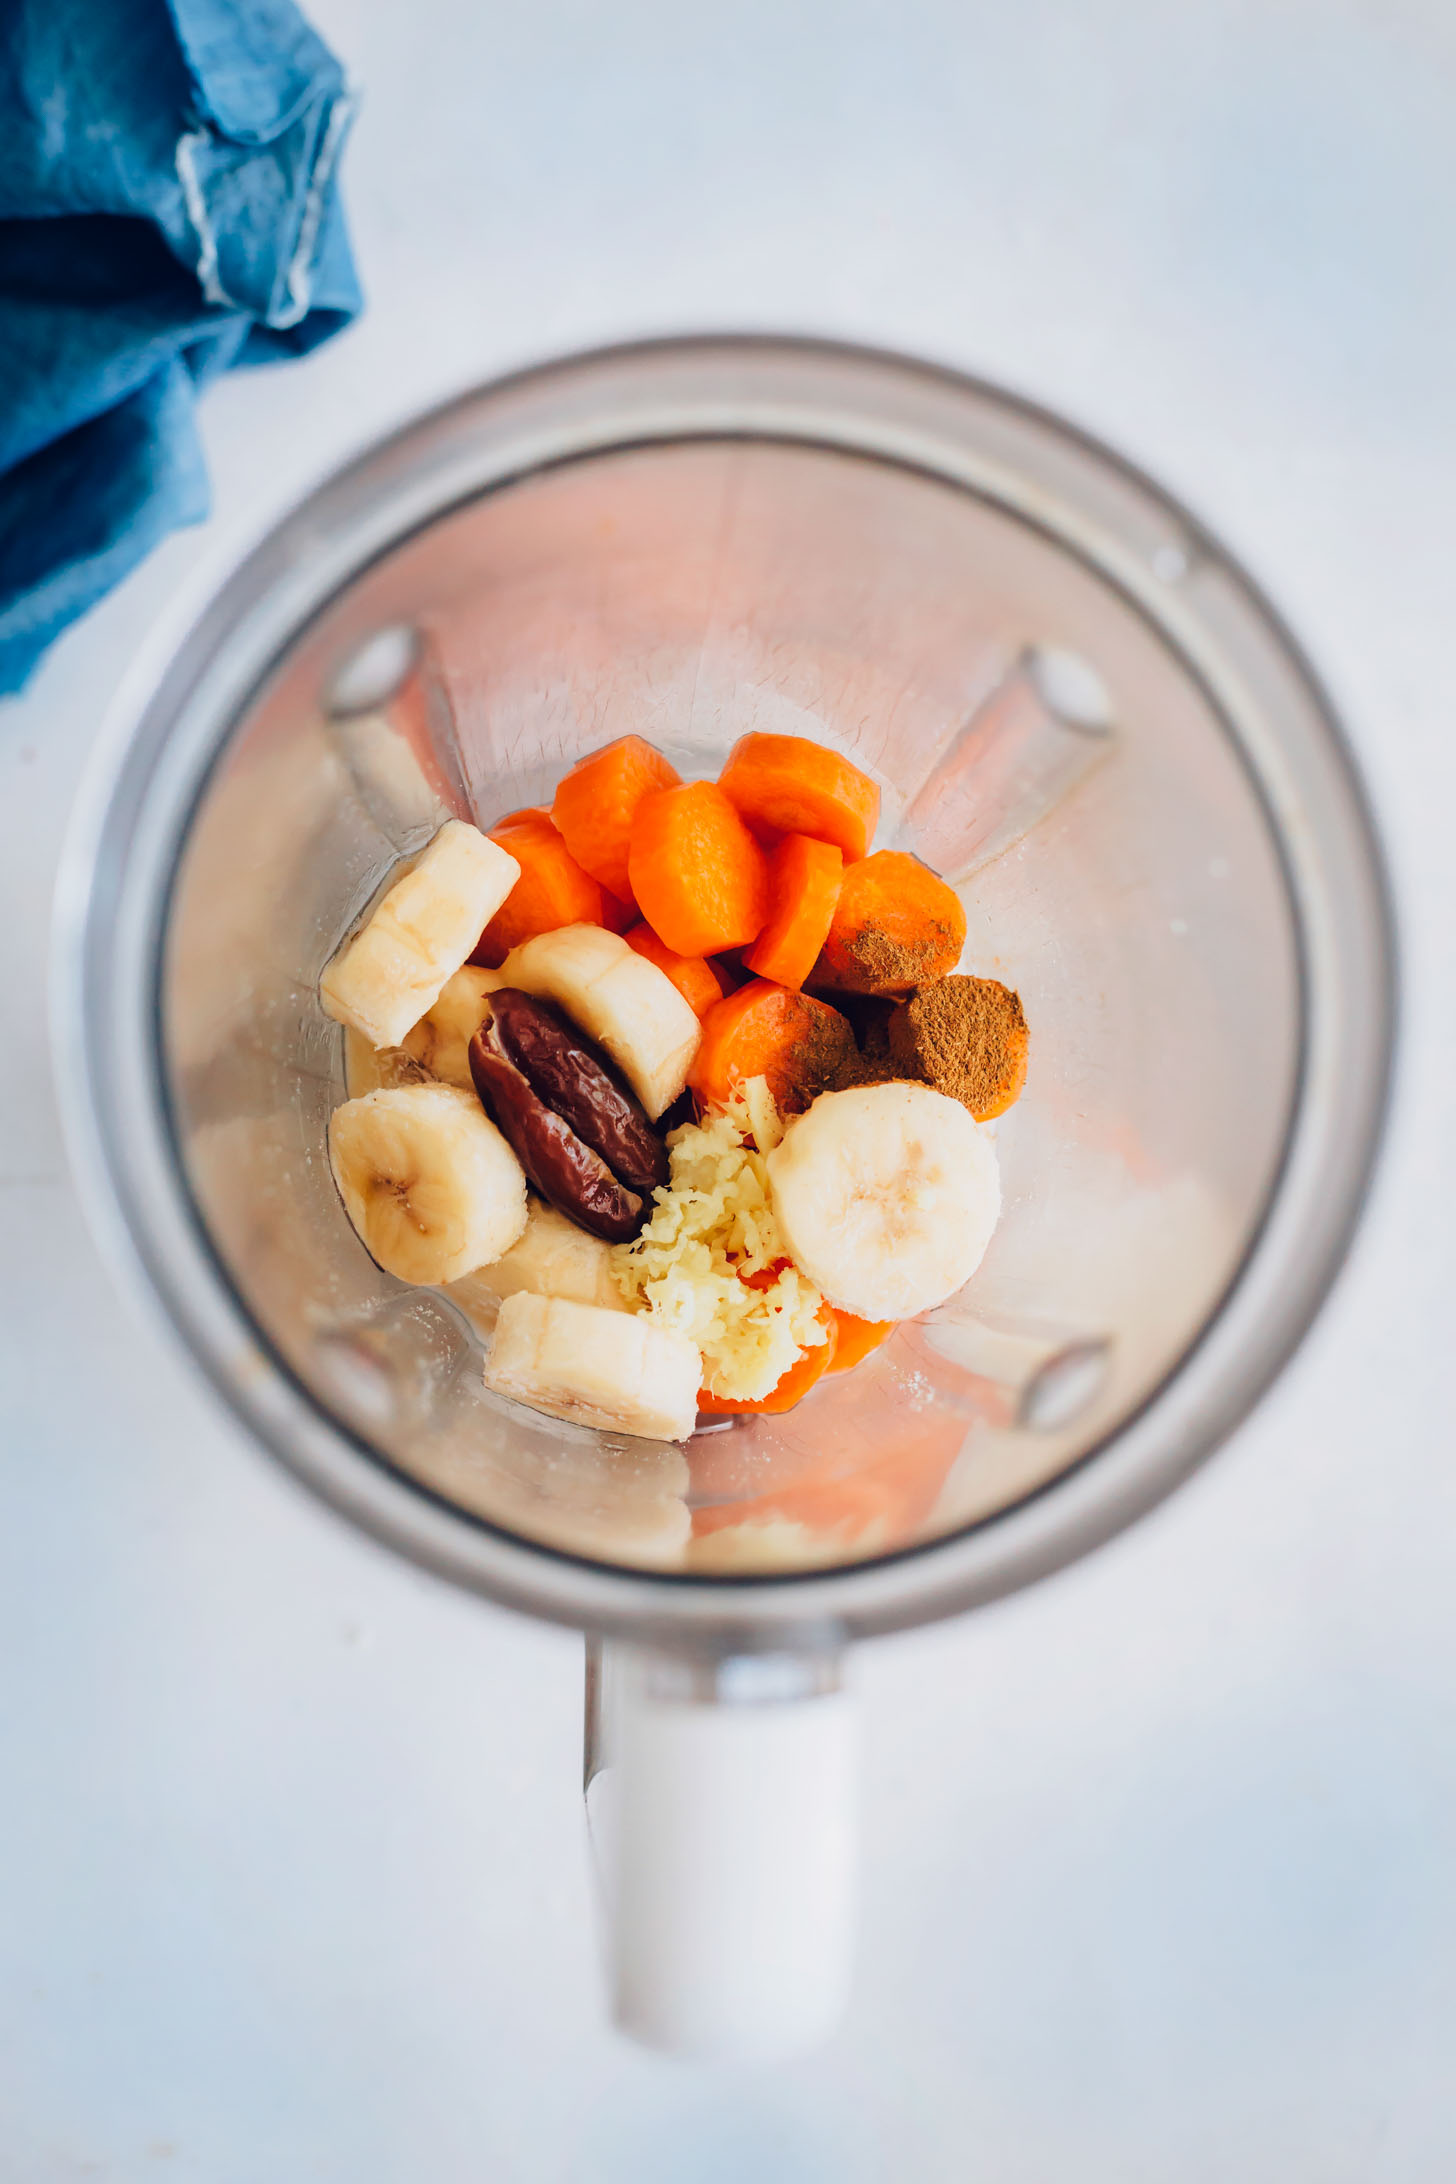 Blender with carrots, banana, date, ginger, and spices